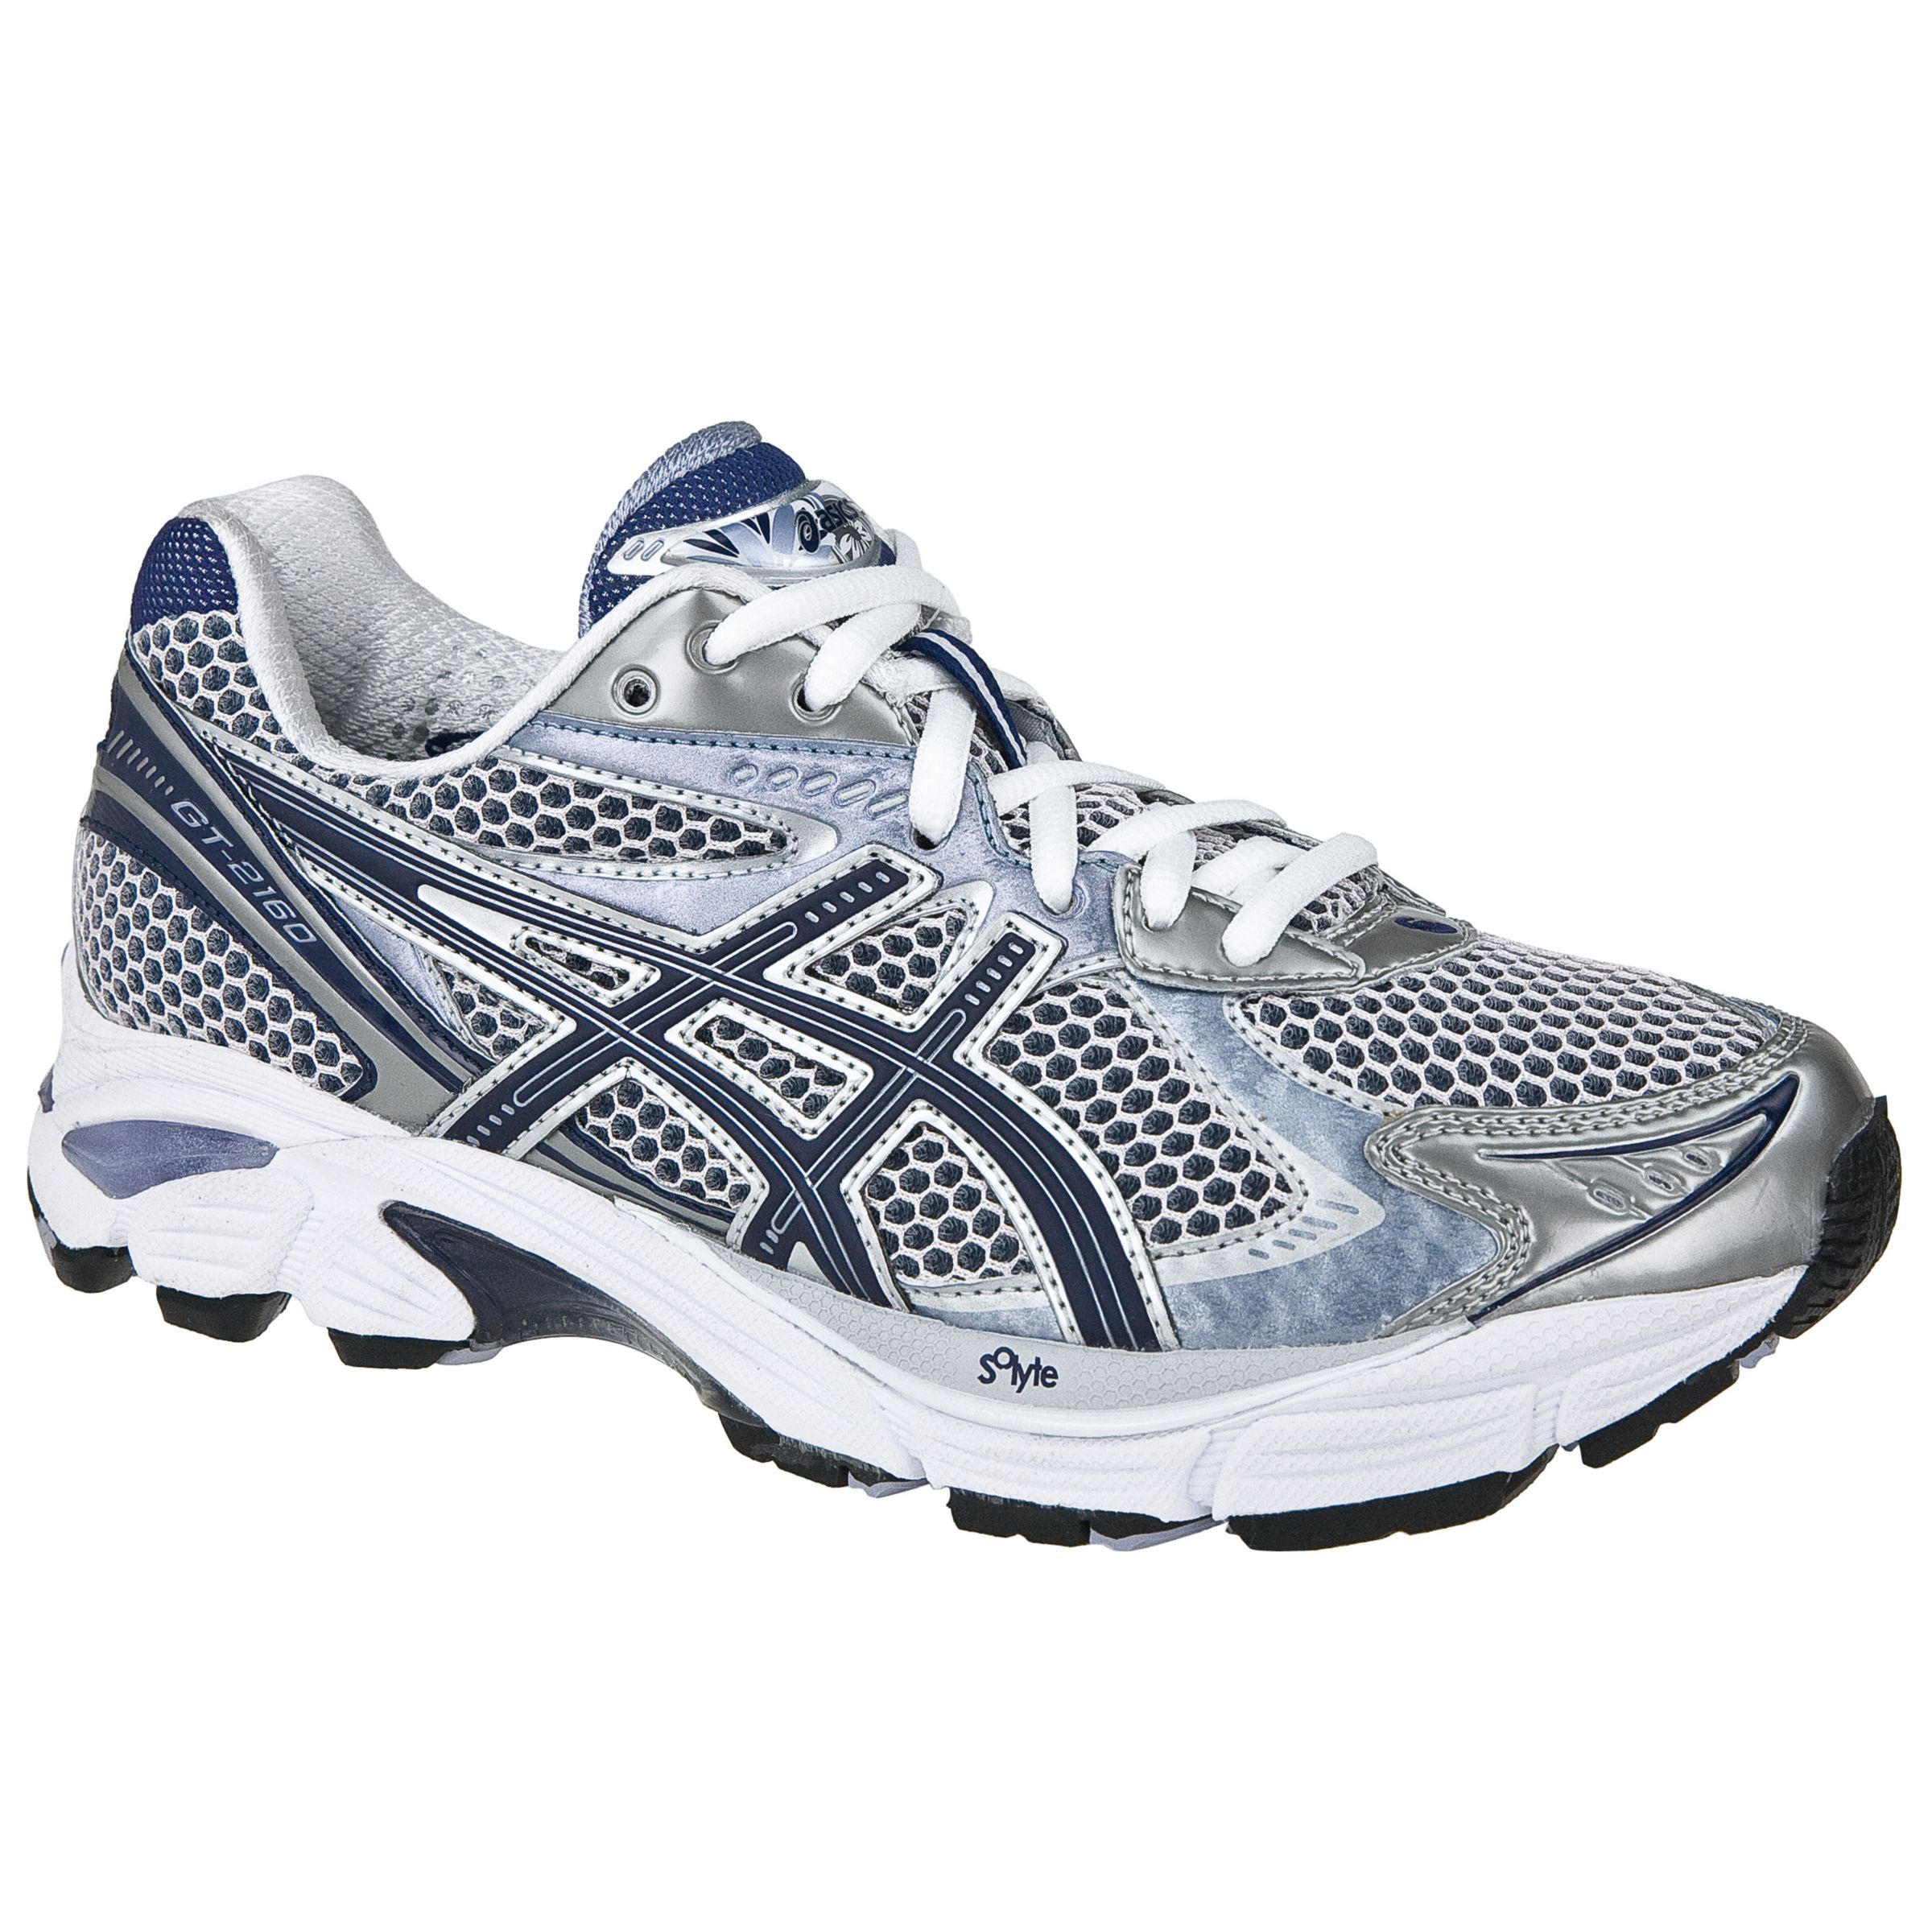 Asics GT2160 Womens Running Shoes, Lilac